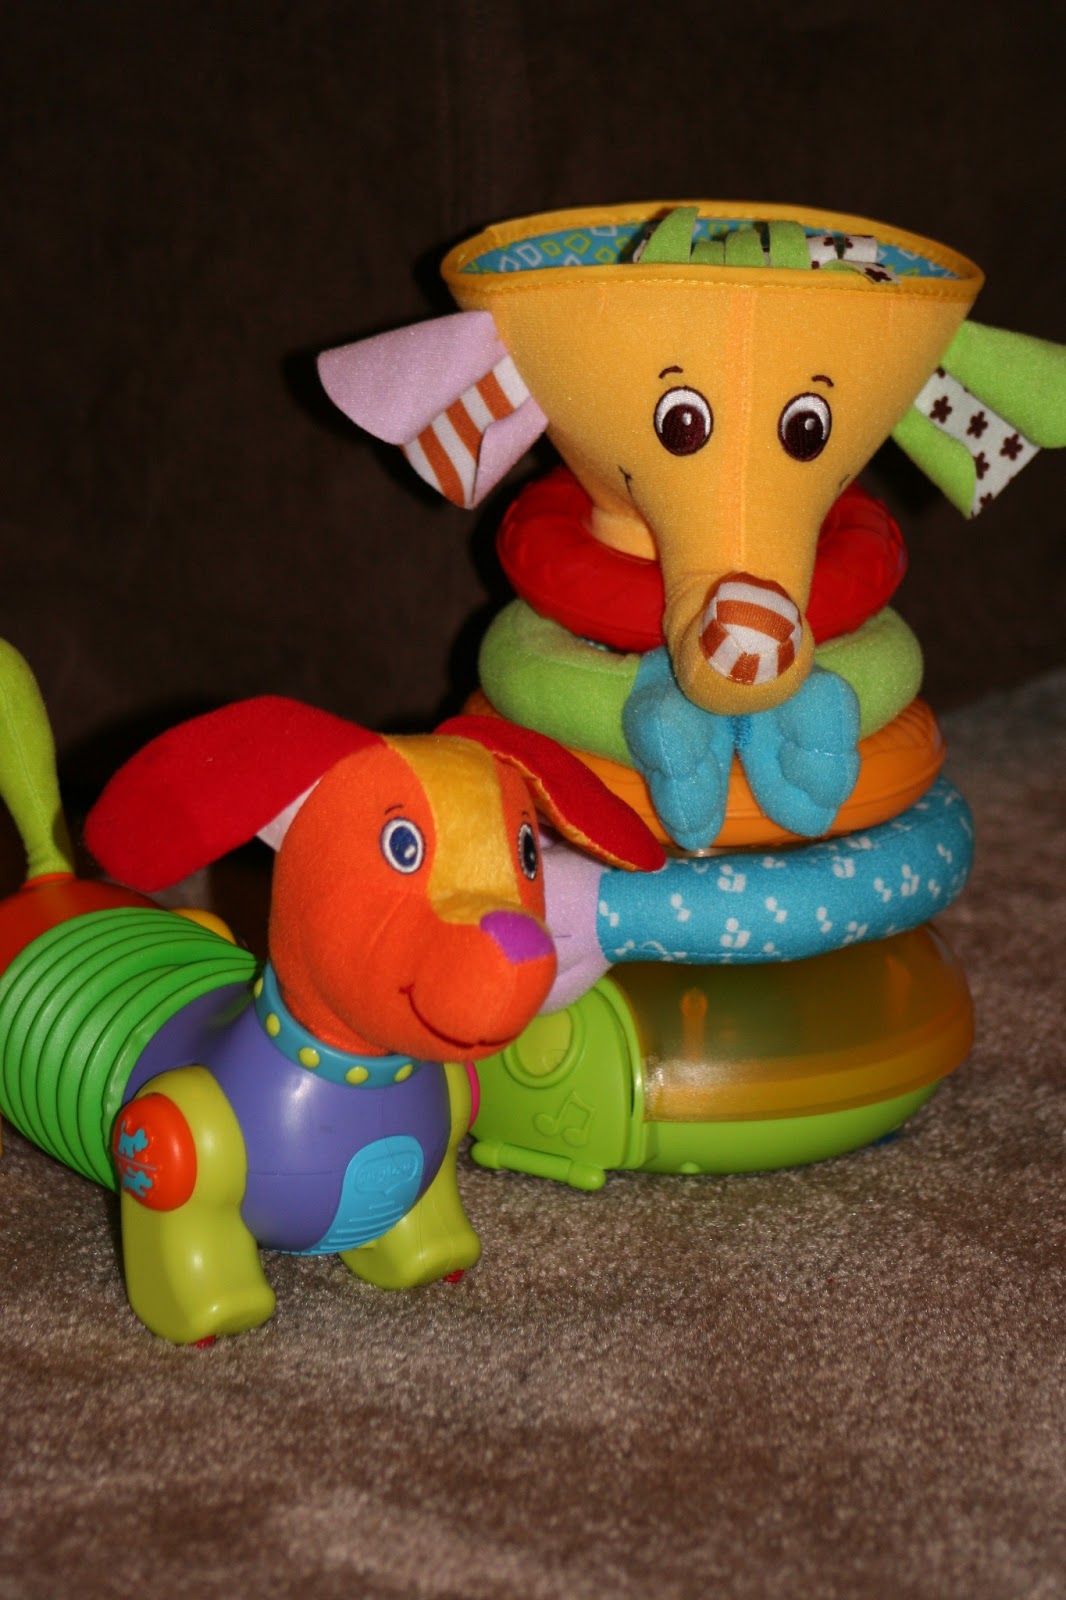 Review & Giveaway for Tiny Love Baby Toys @TinyLove_USA